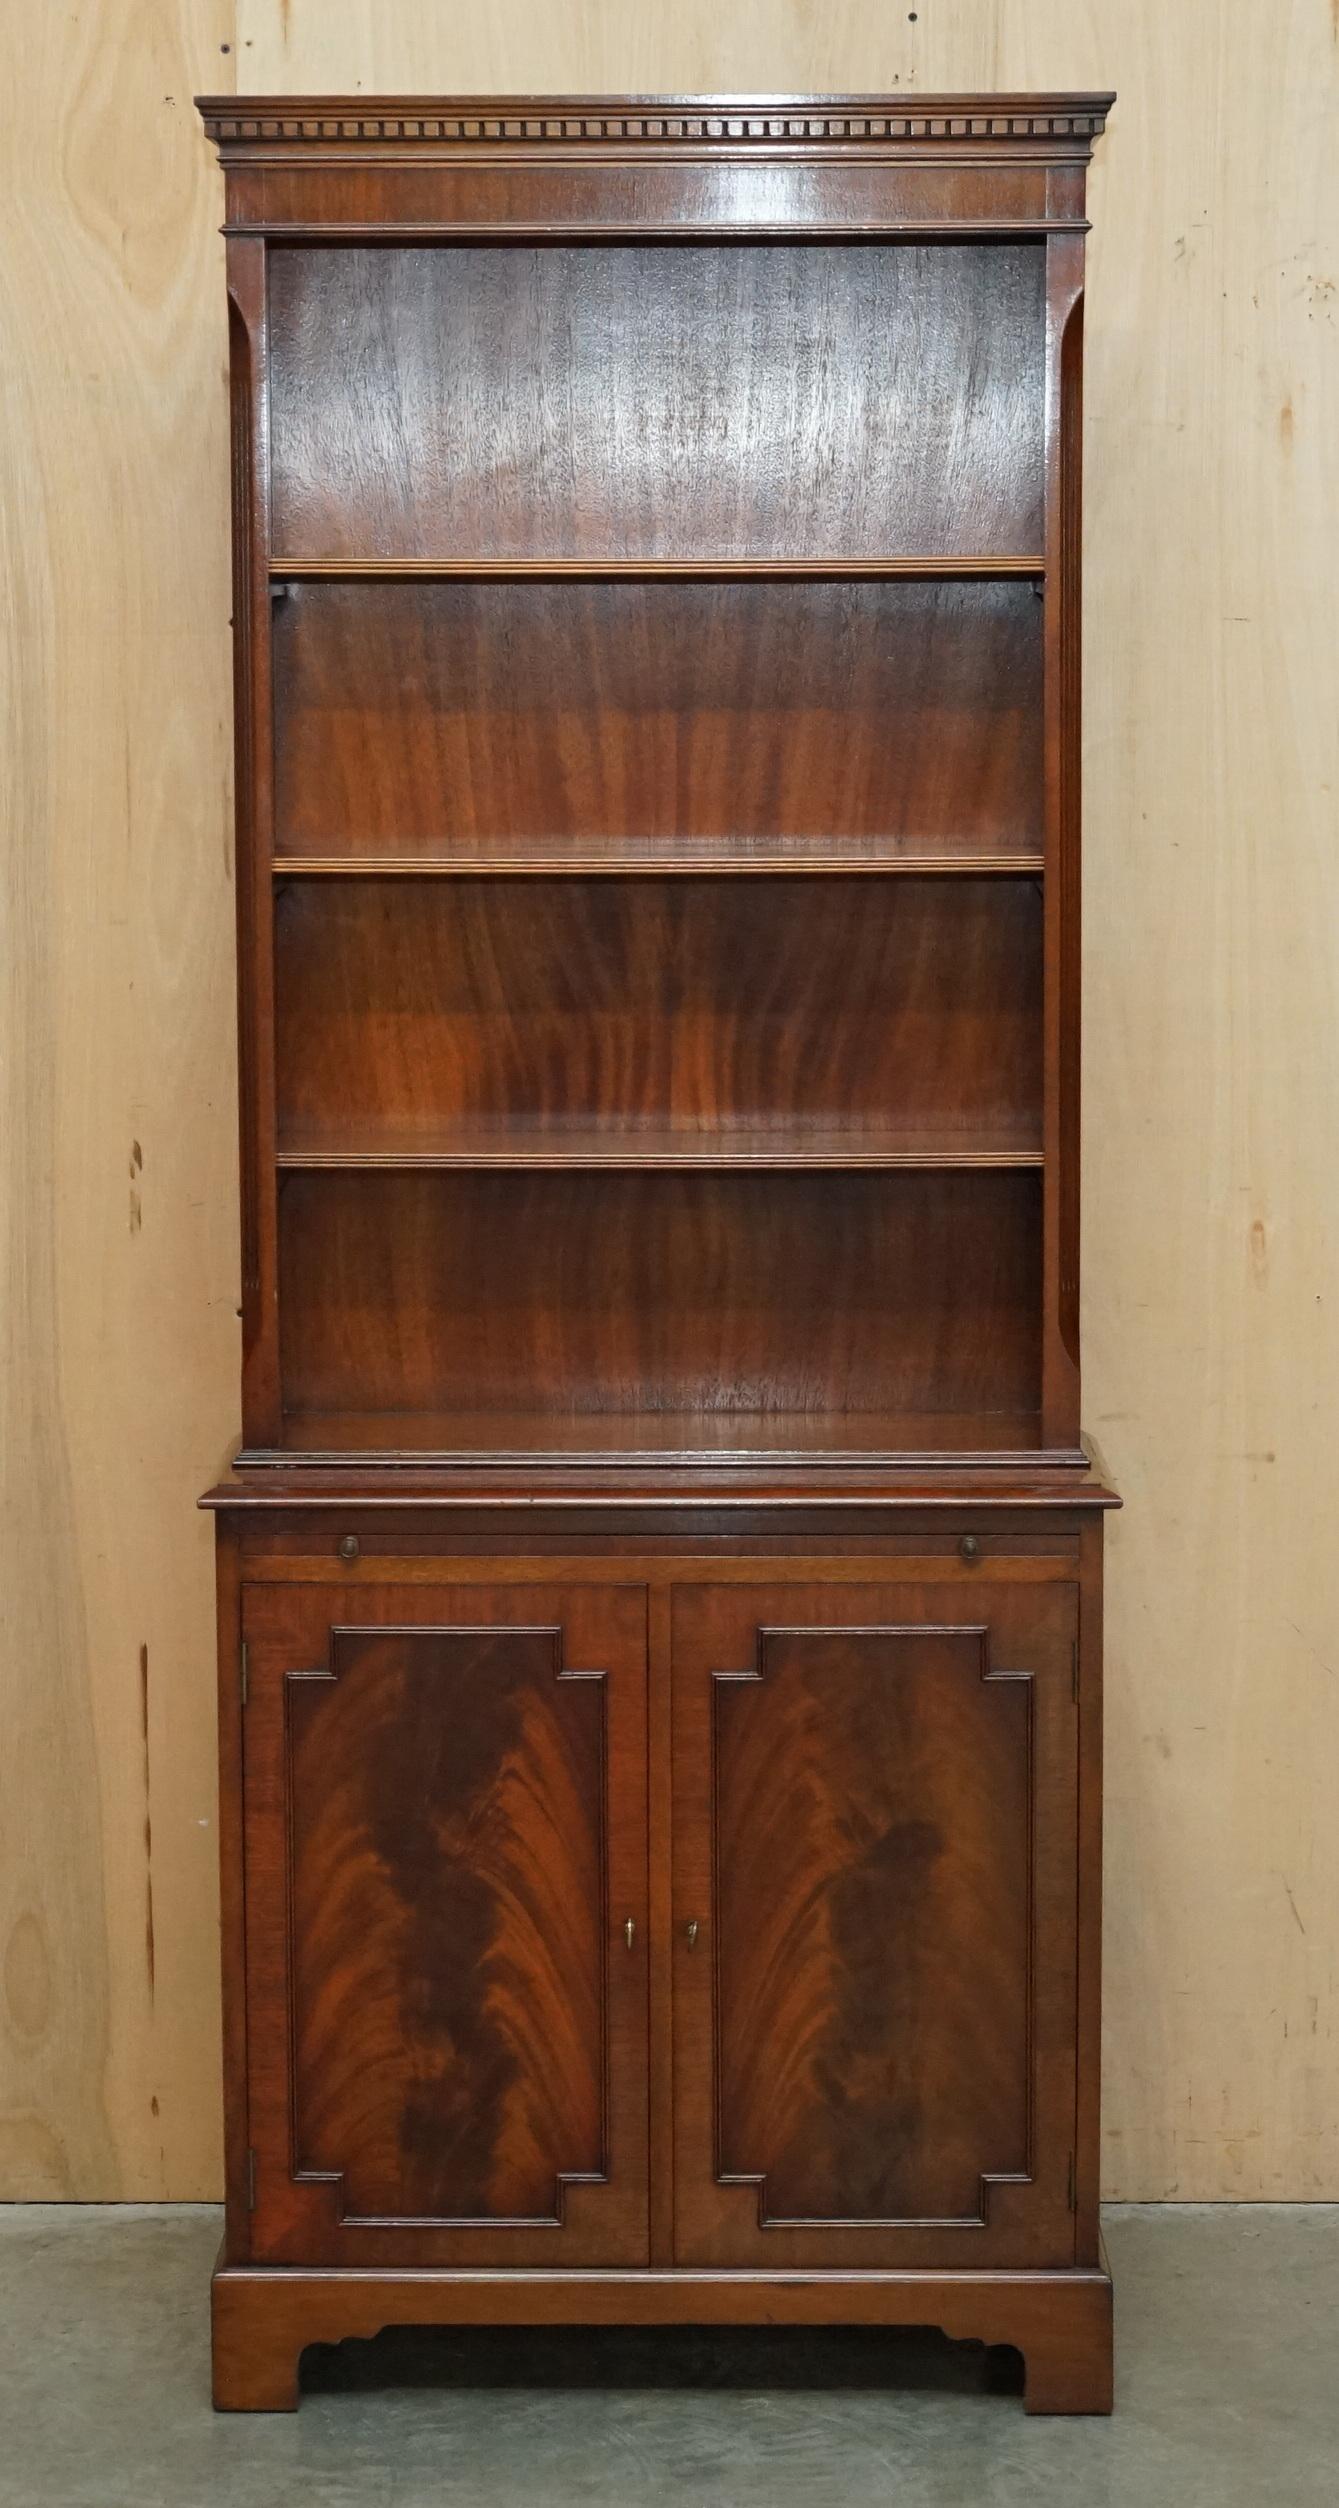 Victorian EXQUISITE PAIR OF FLAMED HARDWOOD LIBRARY BOOKCASES SLIP DRiNKS SERVING SHELVES